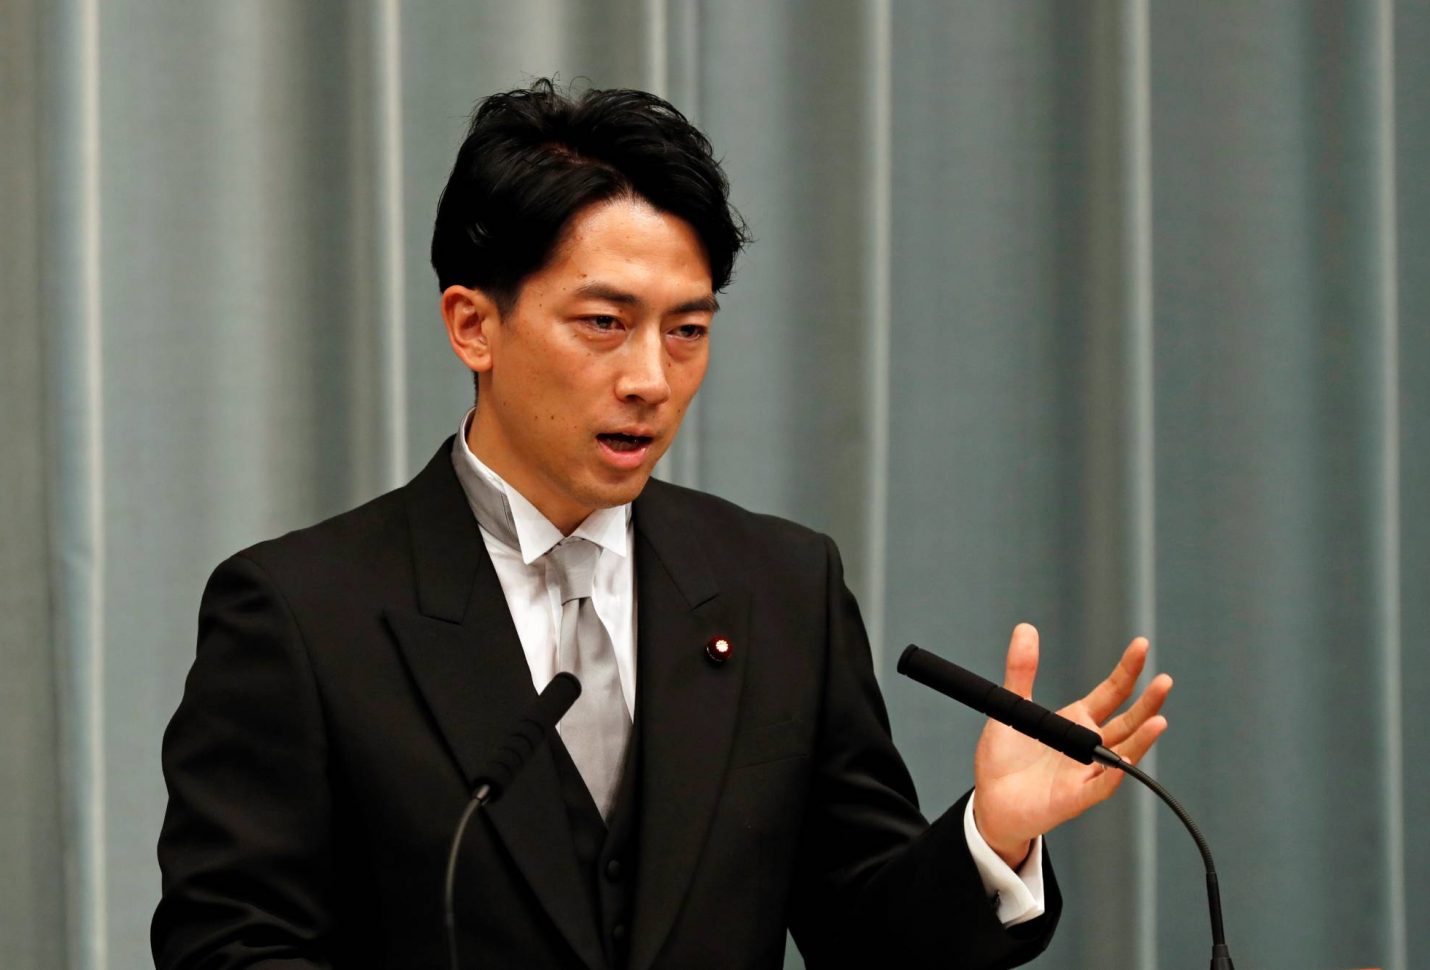 Japan to boost greenhouse gas reduction target, environment minister says